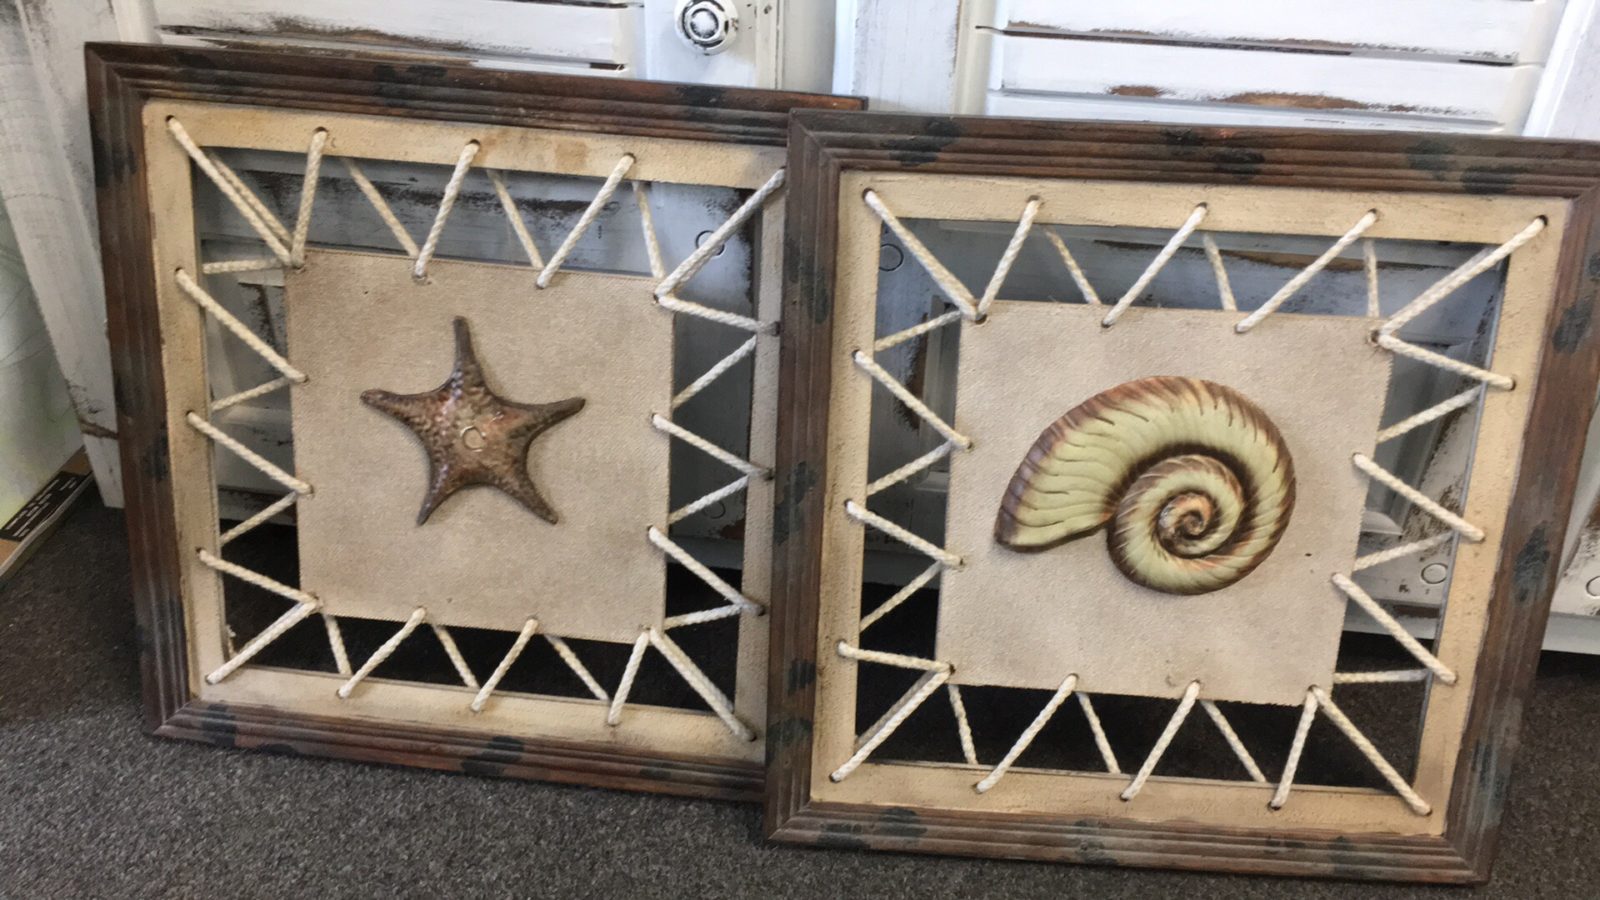 Coastal Decorative Wall Art • Very distinctive wall art/decor featuring raised coastal designs, distressed wood frames and rope detailing. Sold as a set, they would look perfect hung over a console table or bed. Bring home the beach with a touch of coastal elegance.